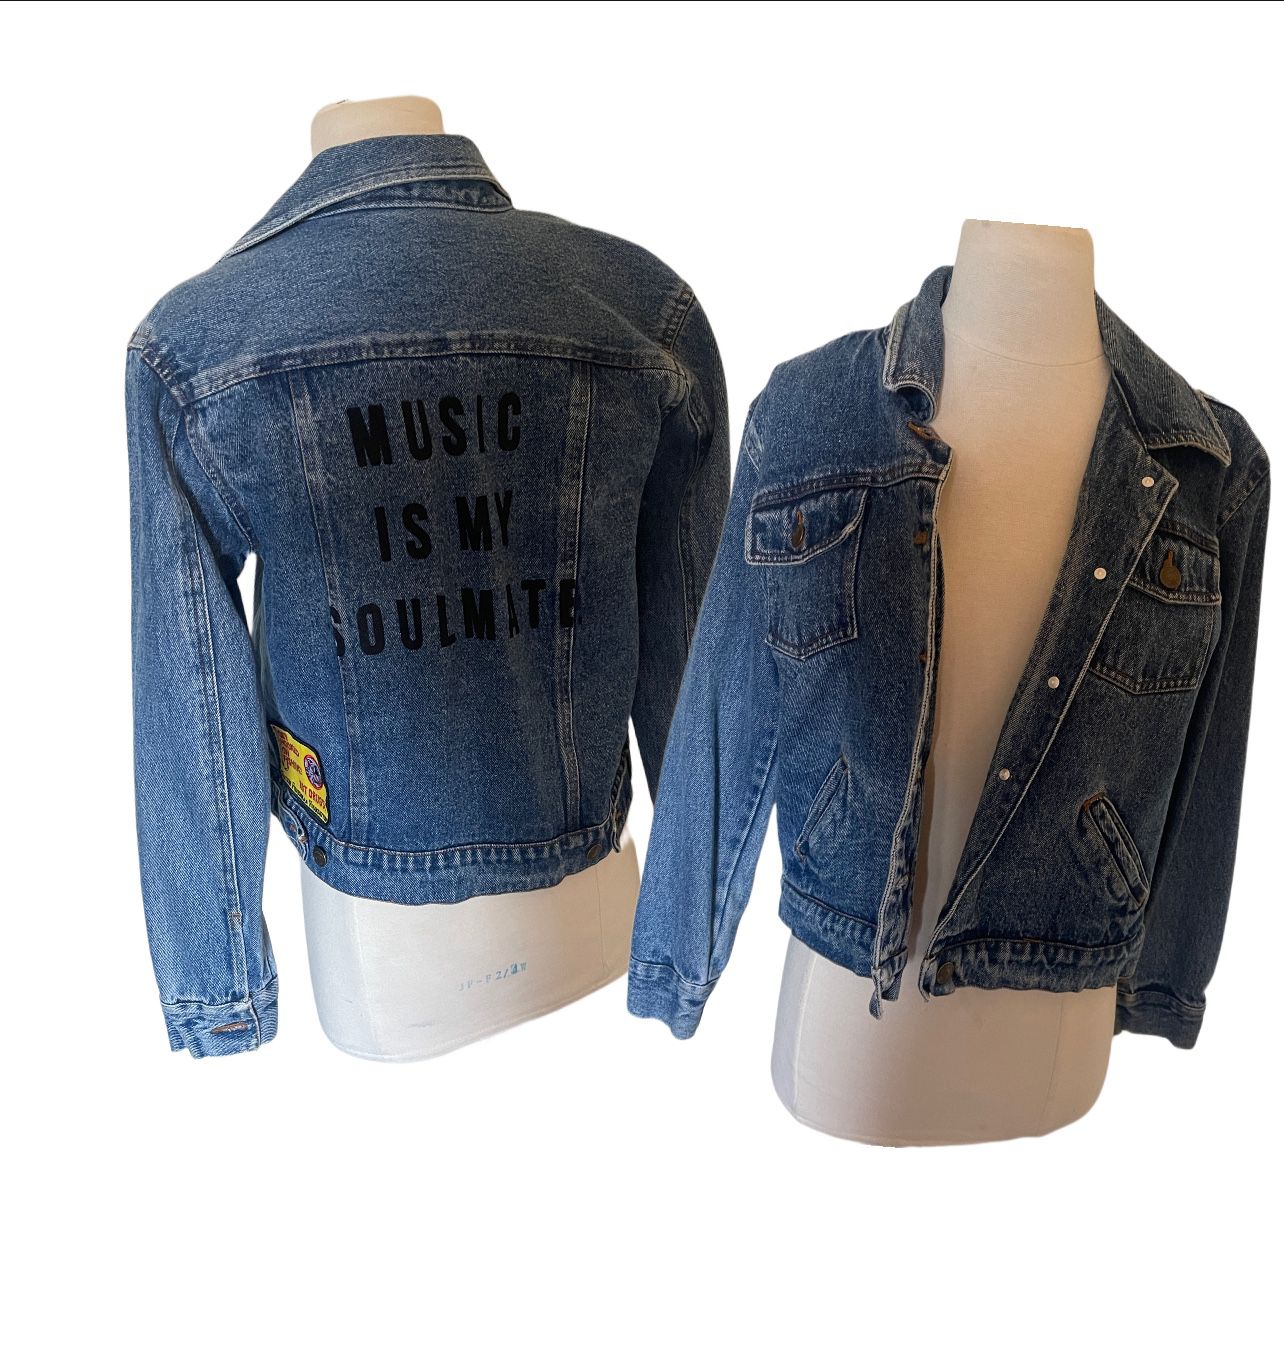 Custom vintage music is my soulmate 80s Jean denim jacket  Says size large. Feels like a small  Length 19” Arms 23” Pit to pit 18.5”